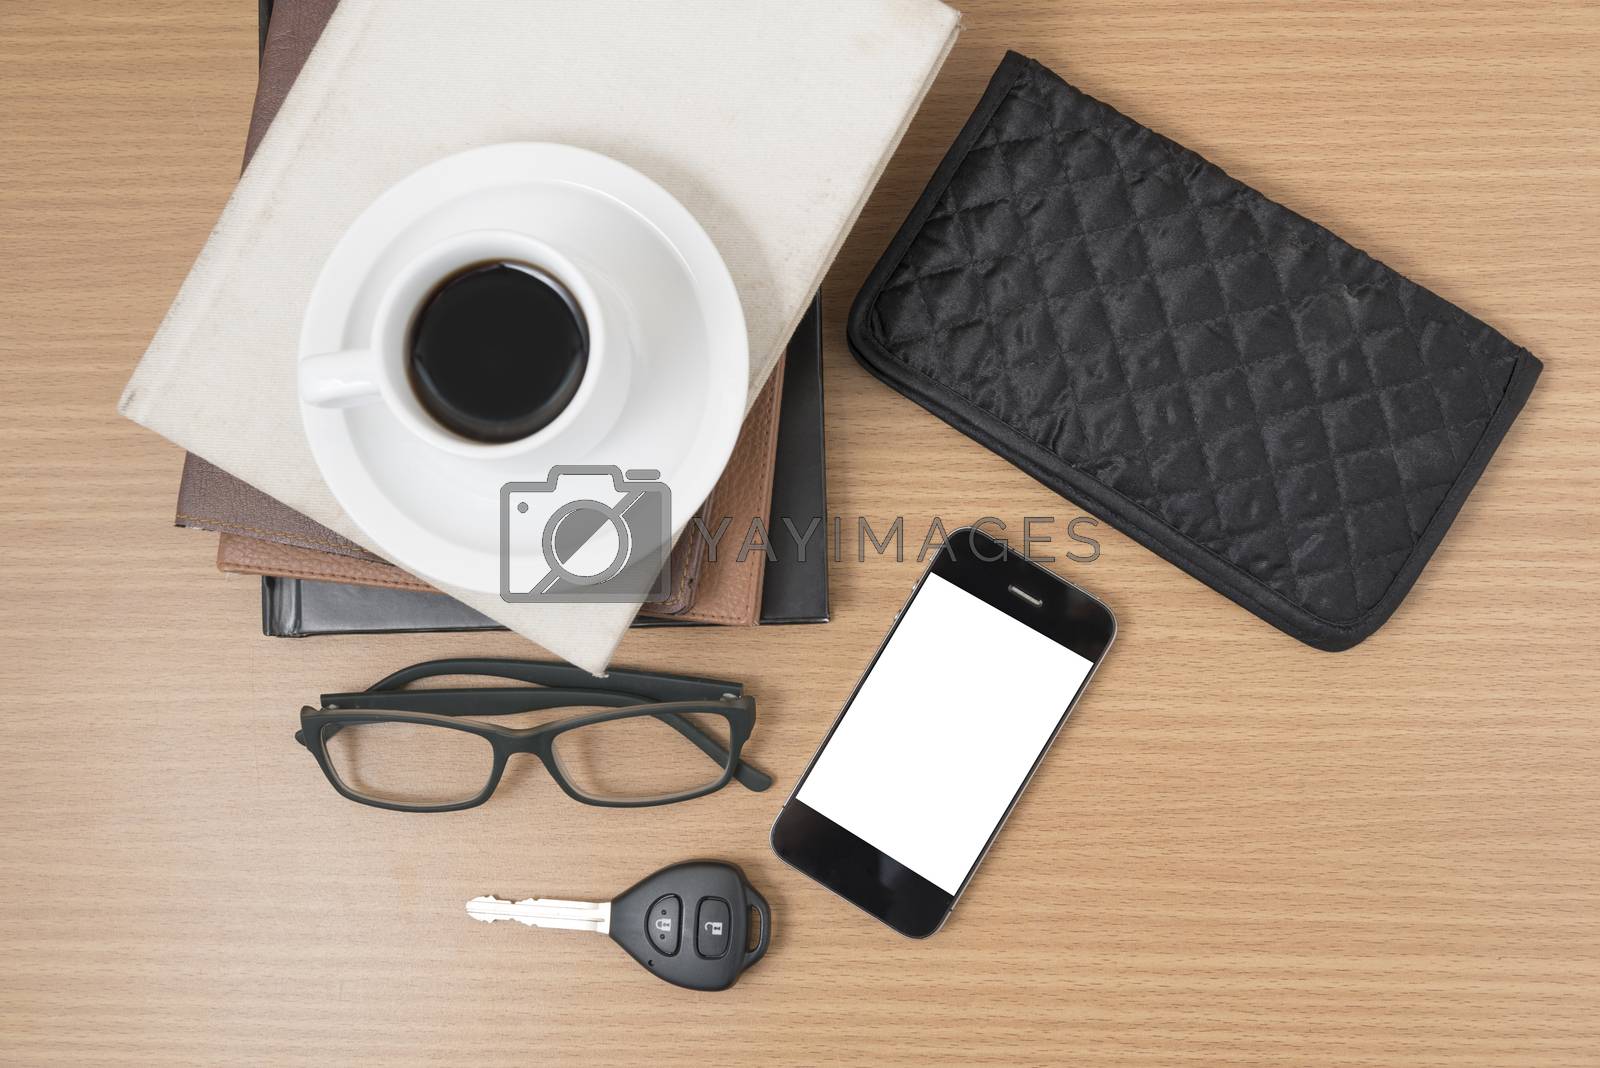 Royalty free image of coffee and phone with stack of book,car key,eyeglasses and walle by ammza12